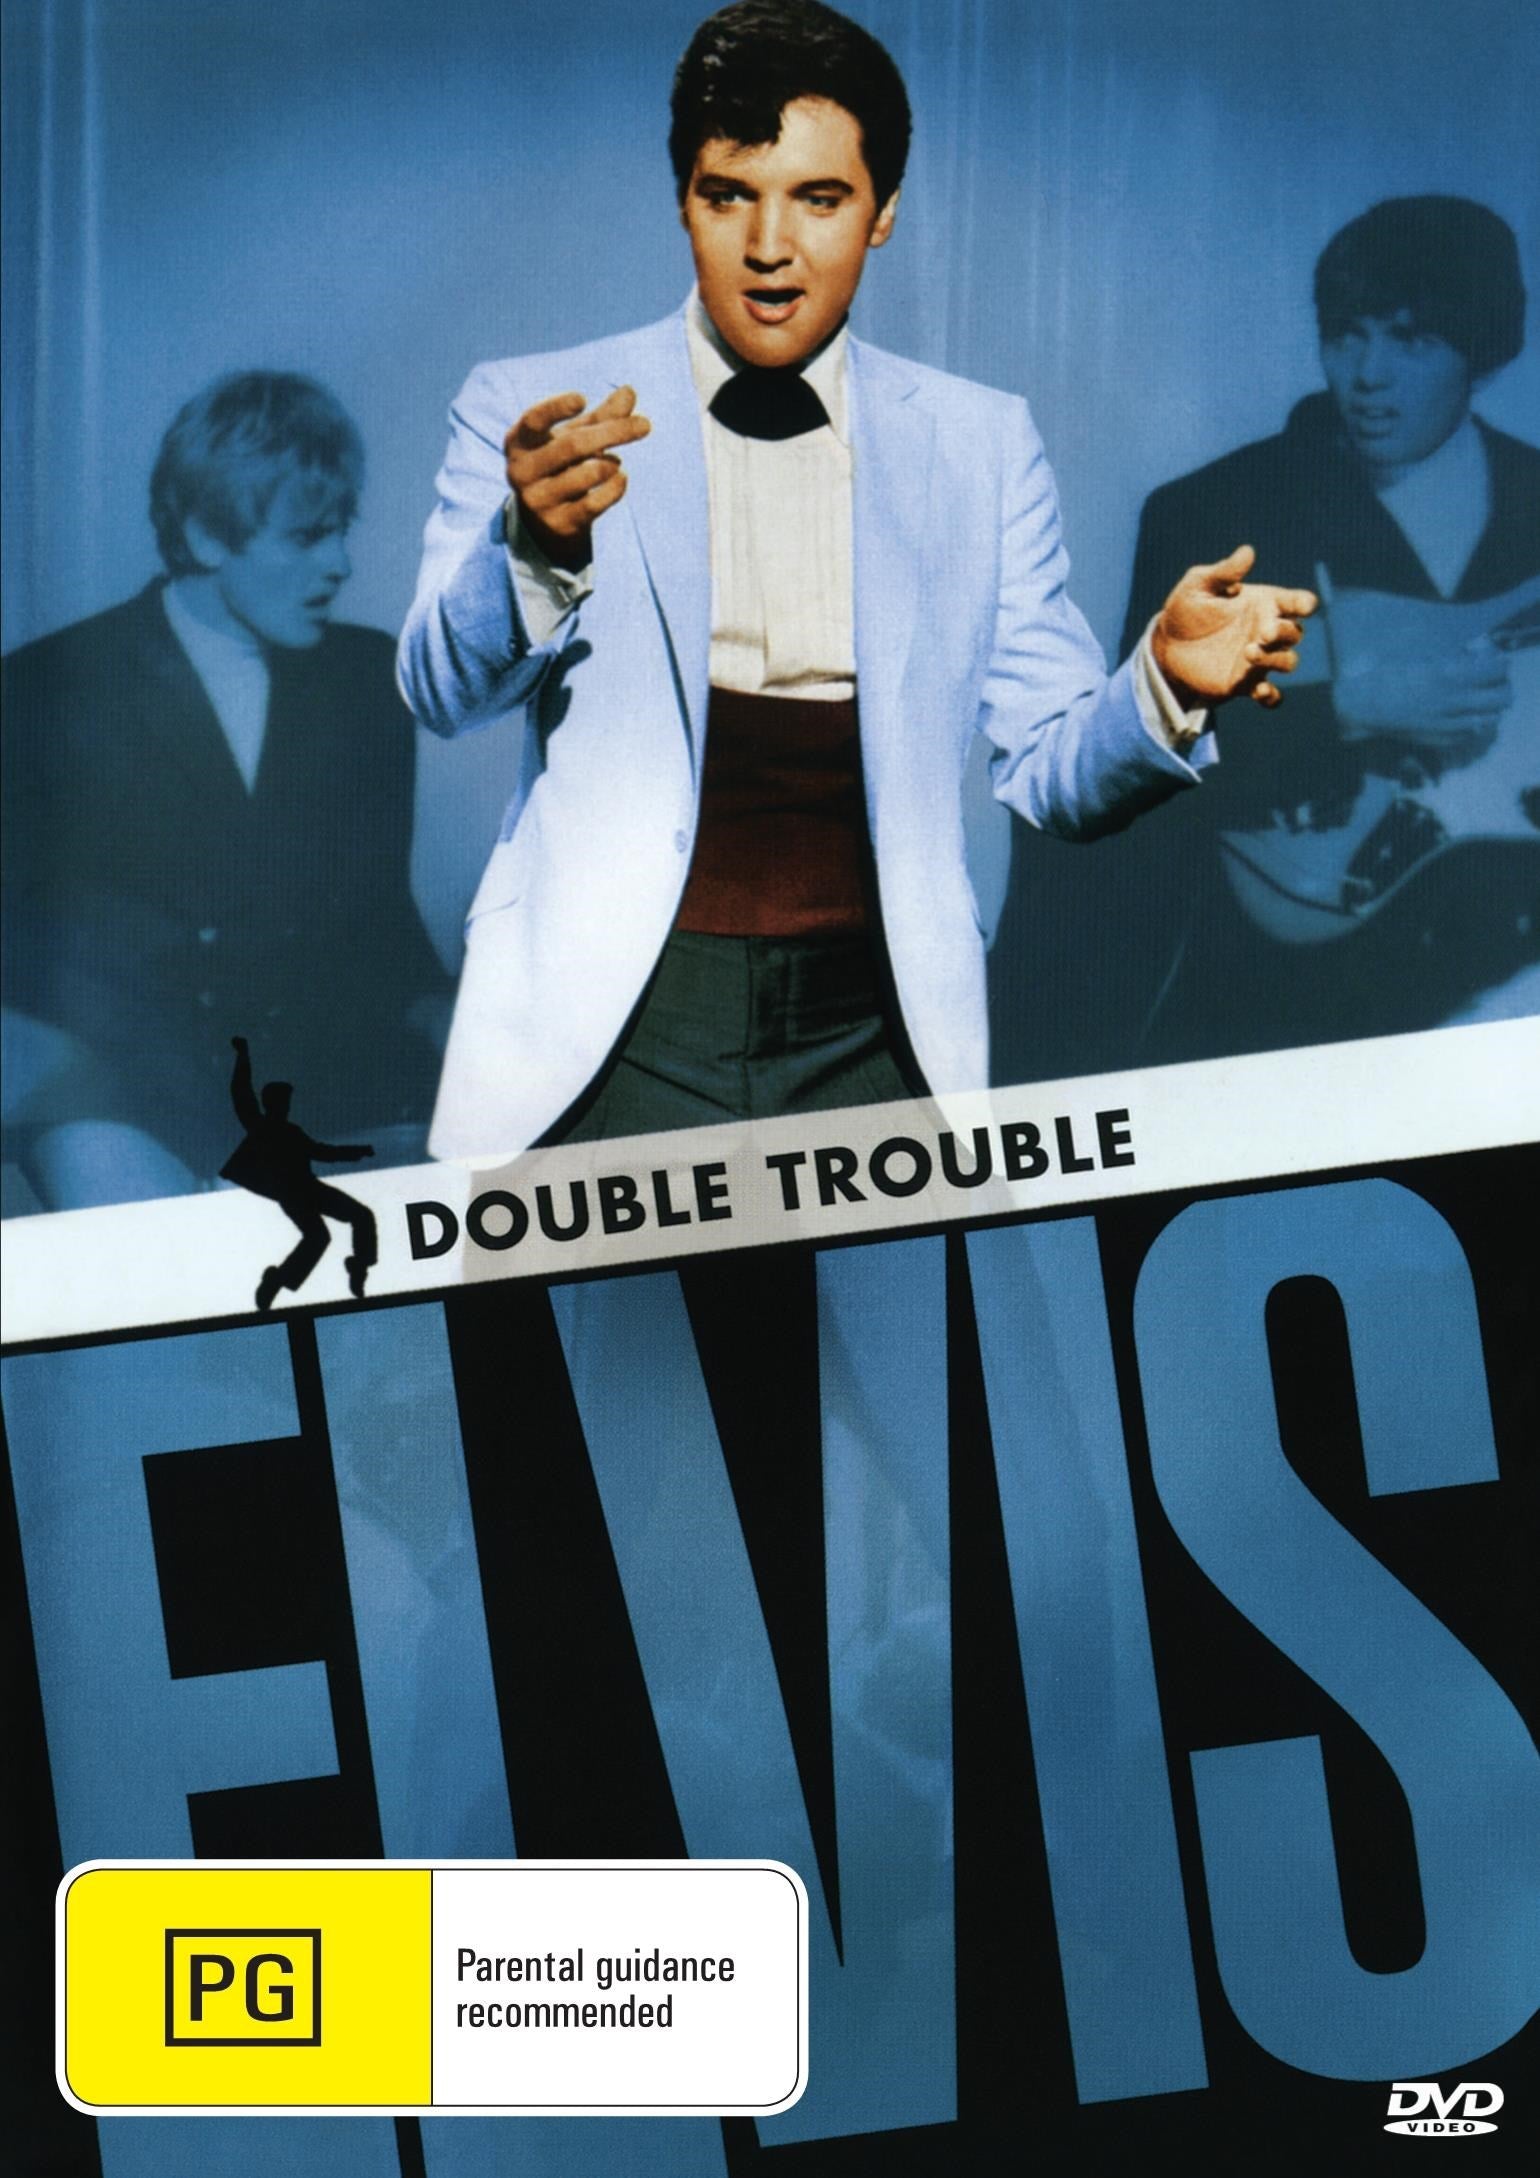 Double Trouble rareandcollectibledvds